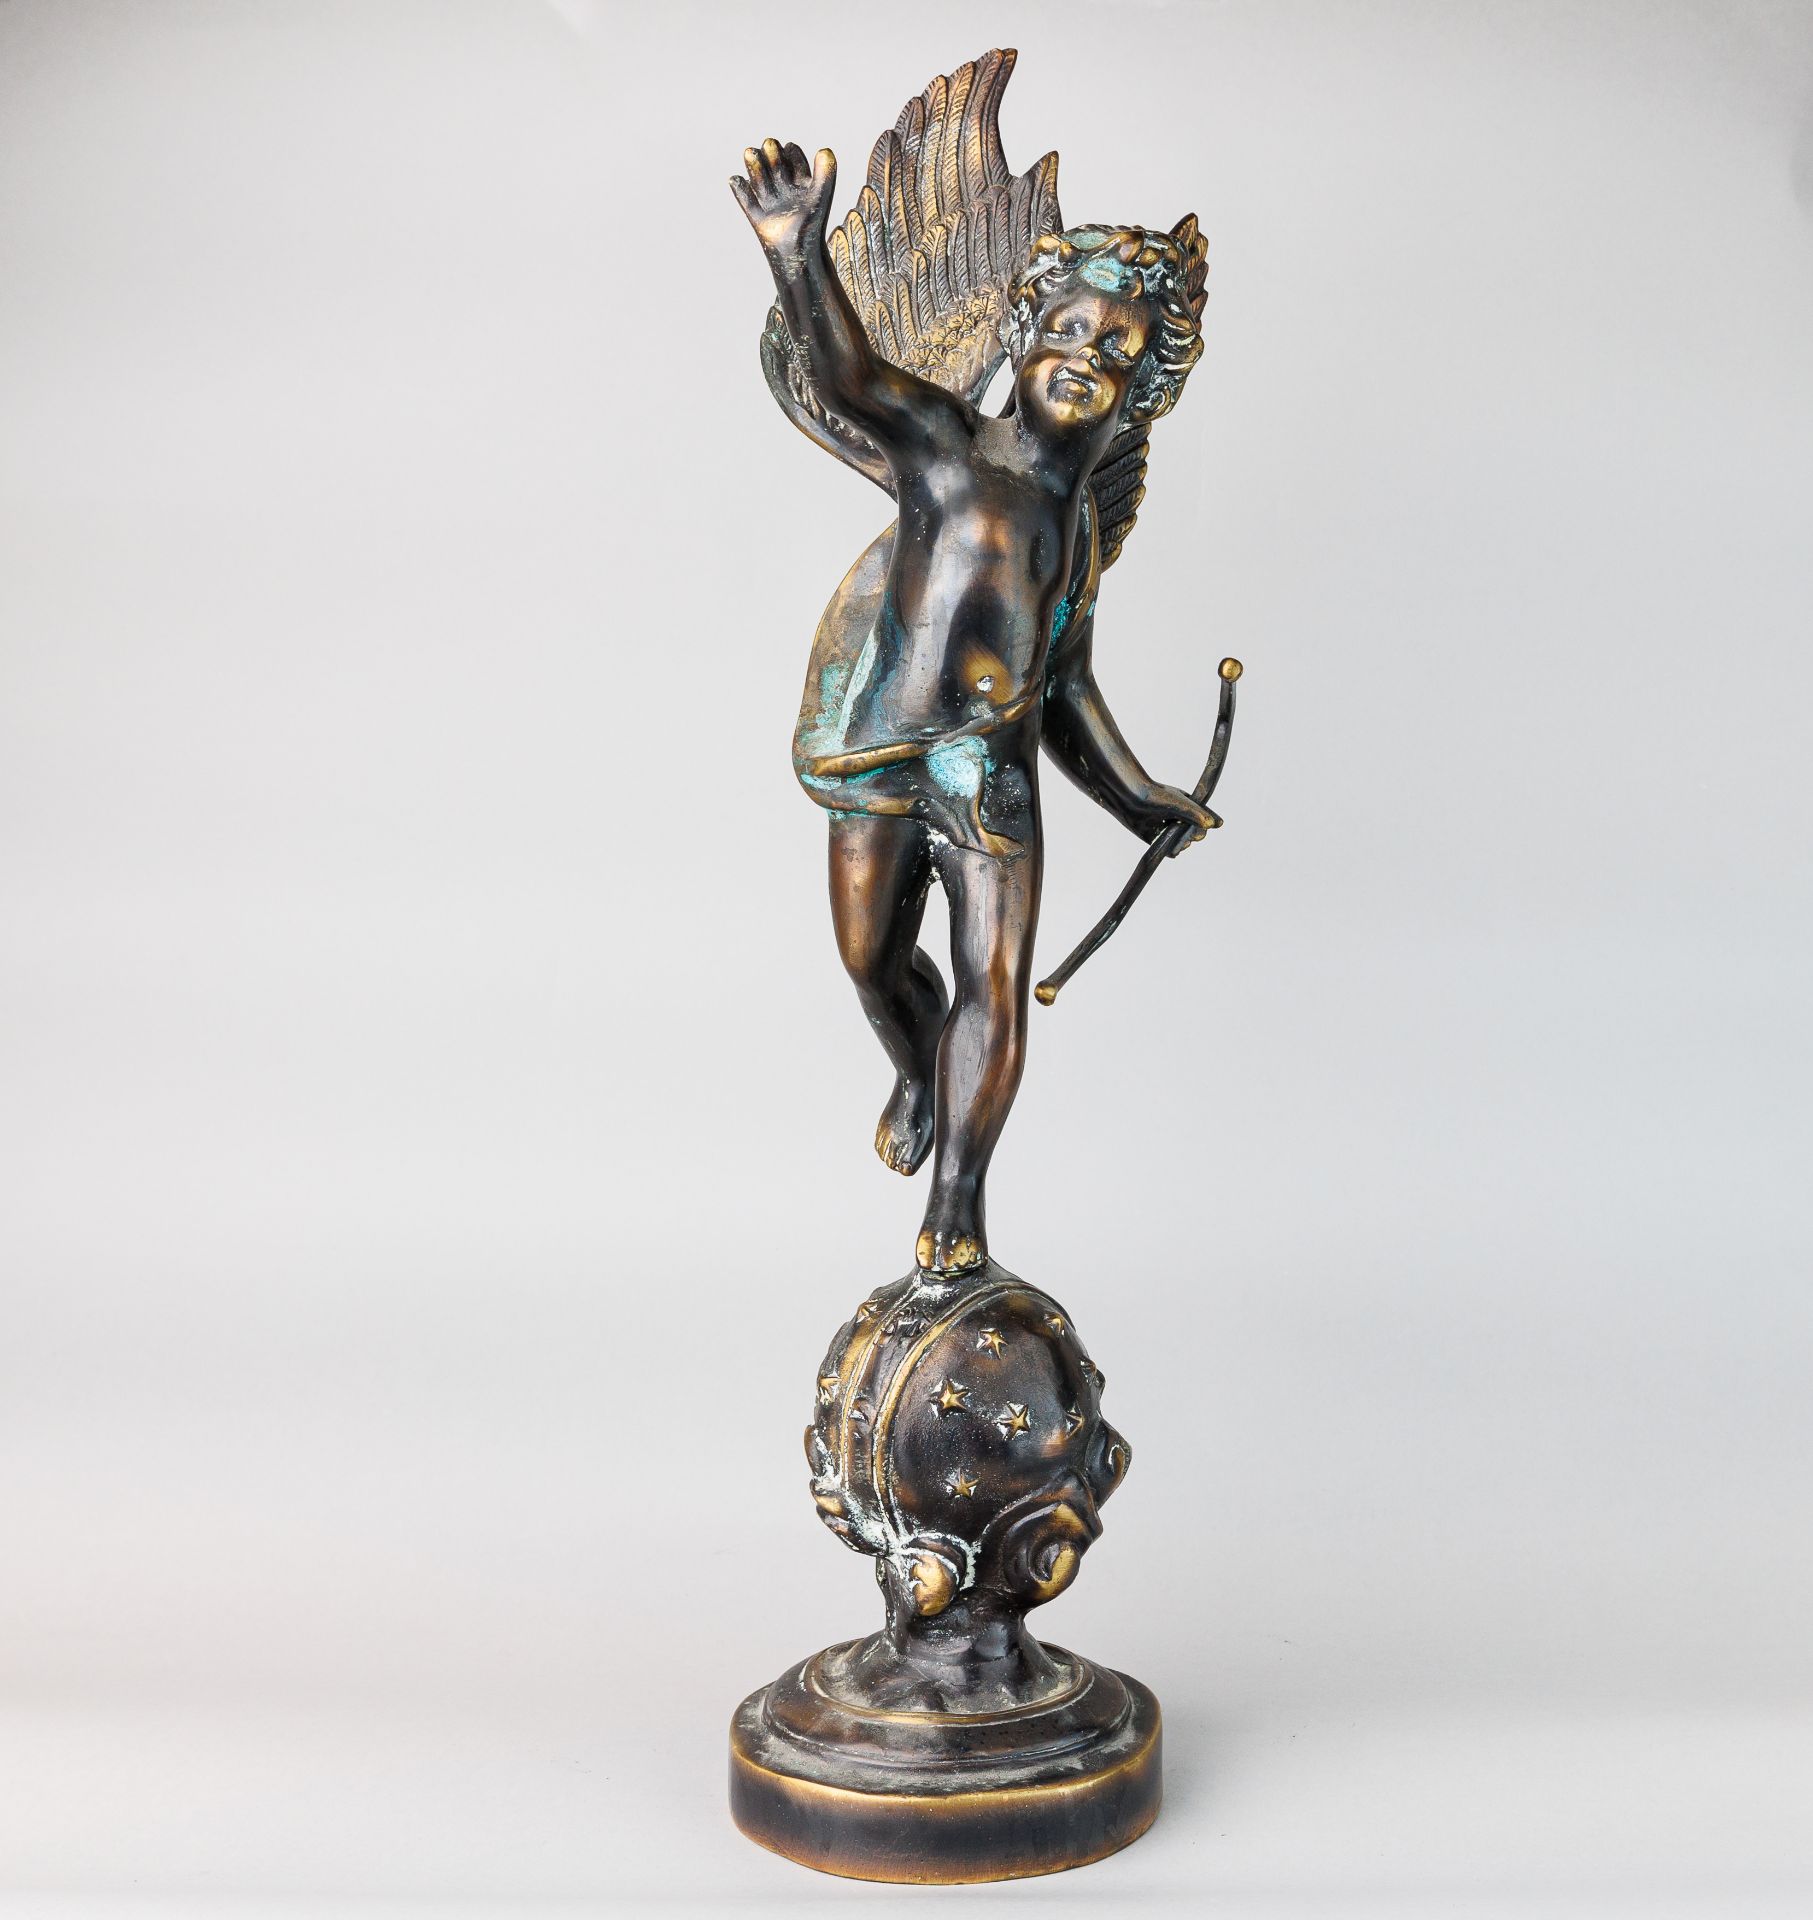 Bronze Sculpture "Cupid with his Bow" standing on an orbit